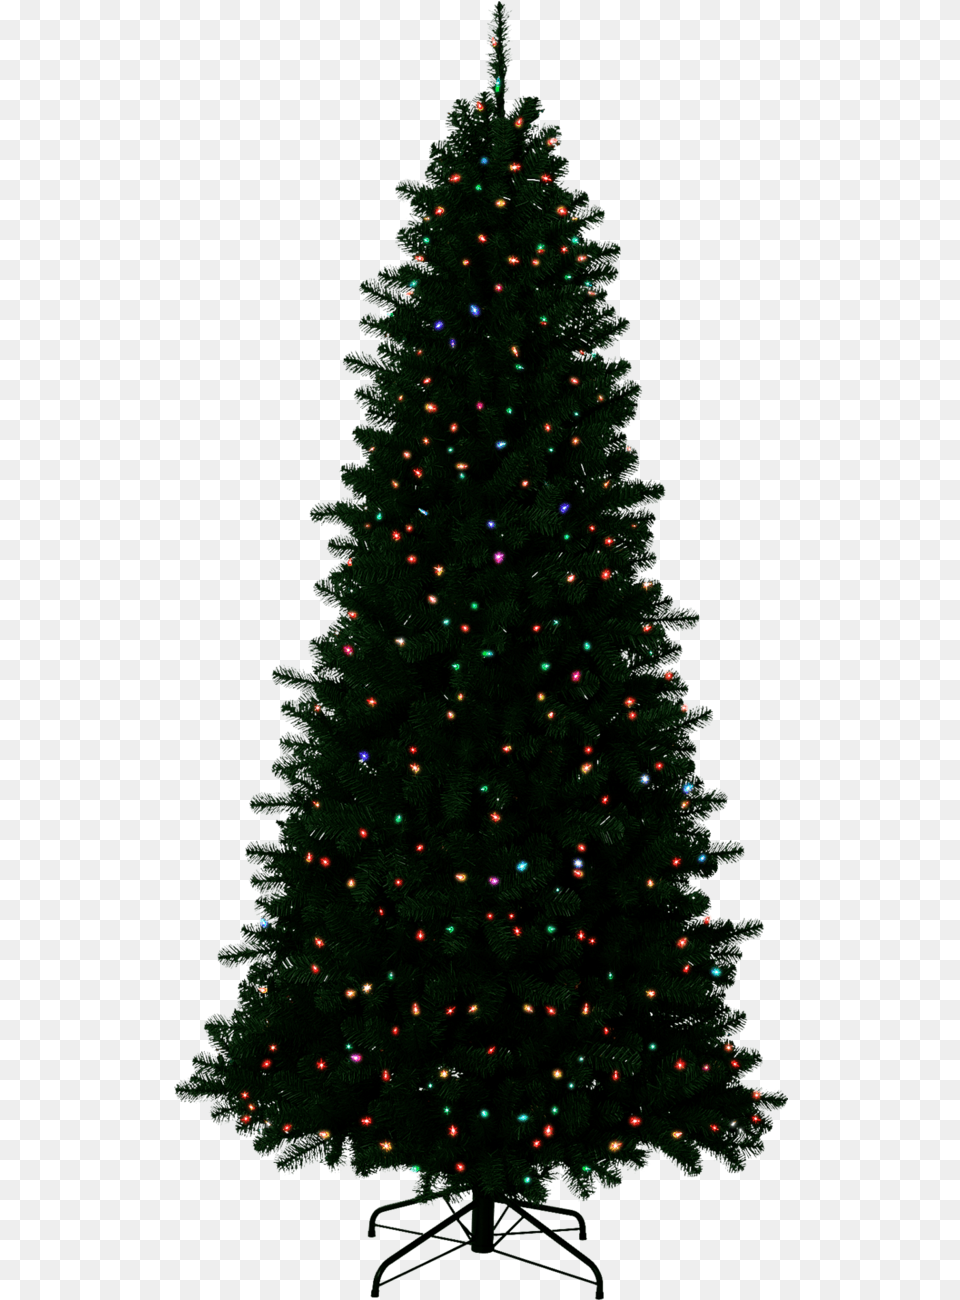 Background Hq Image Christmas Tree With No Decorations, Plant, Christmas Decorations, Festival, Christmas Tree Free Transparent Png